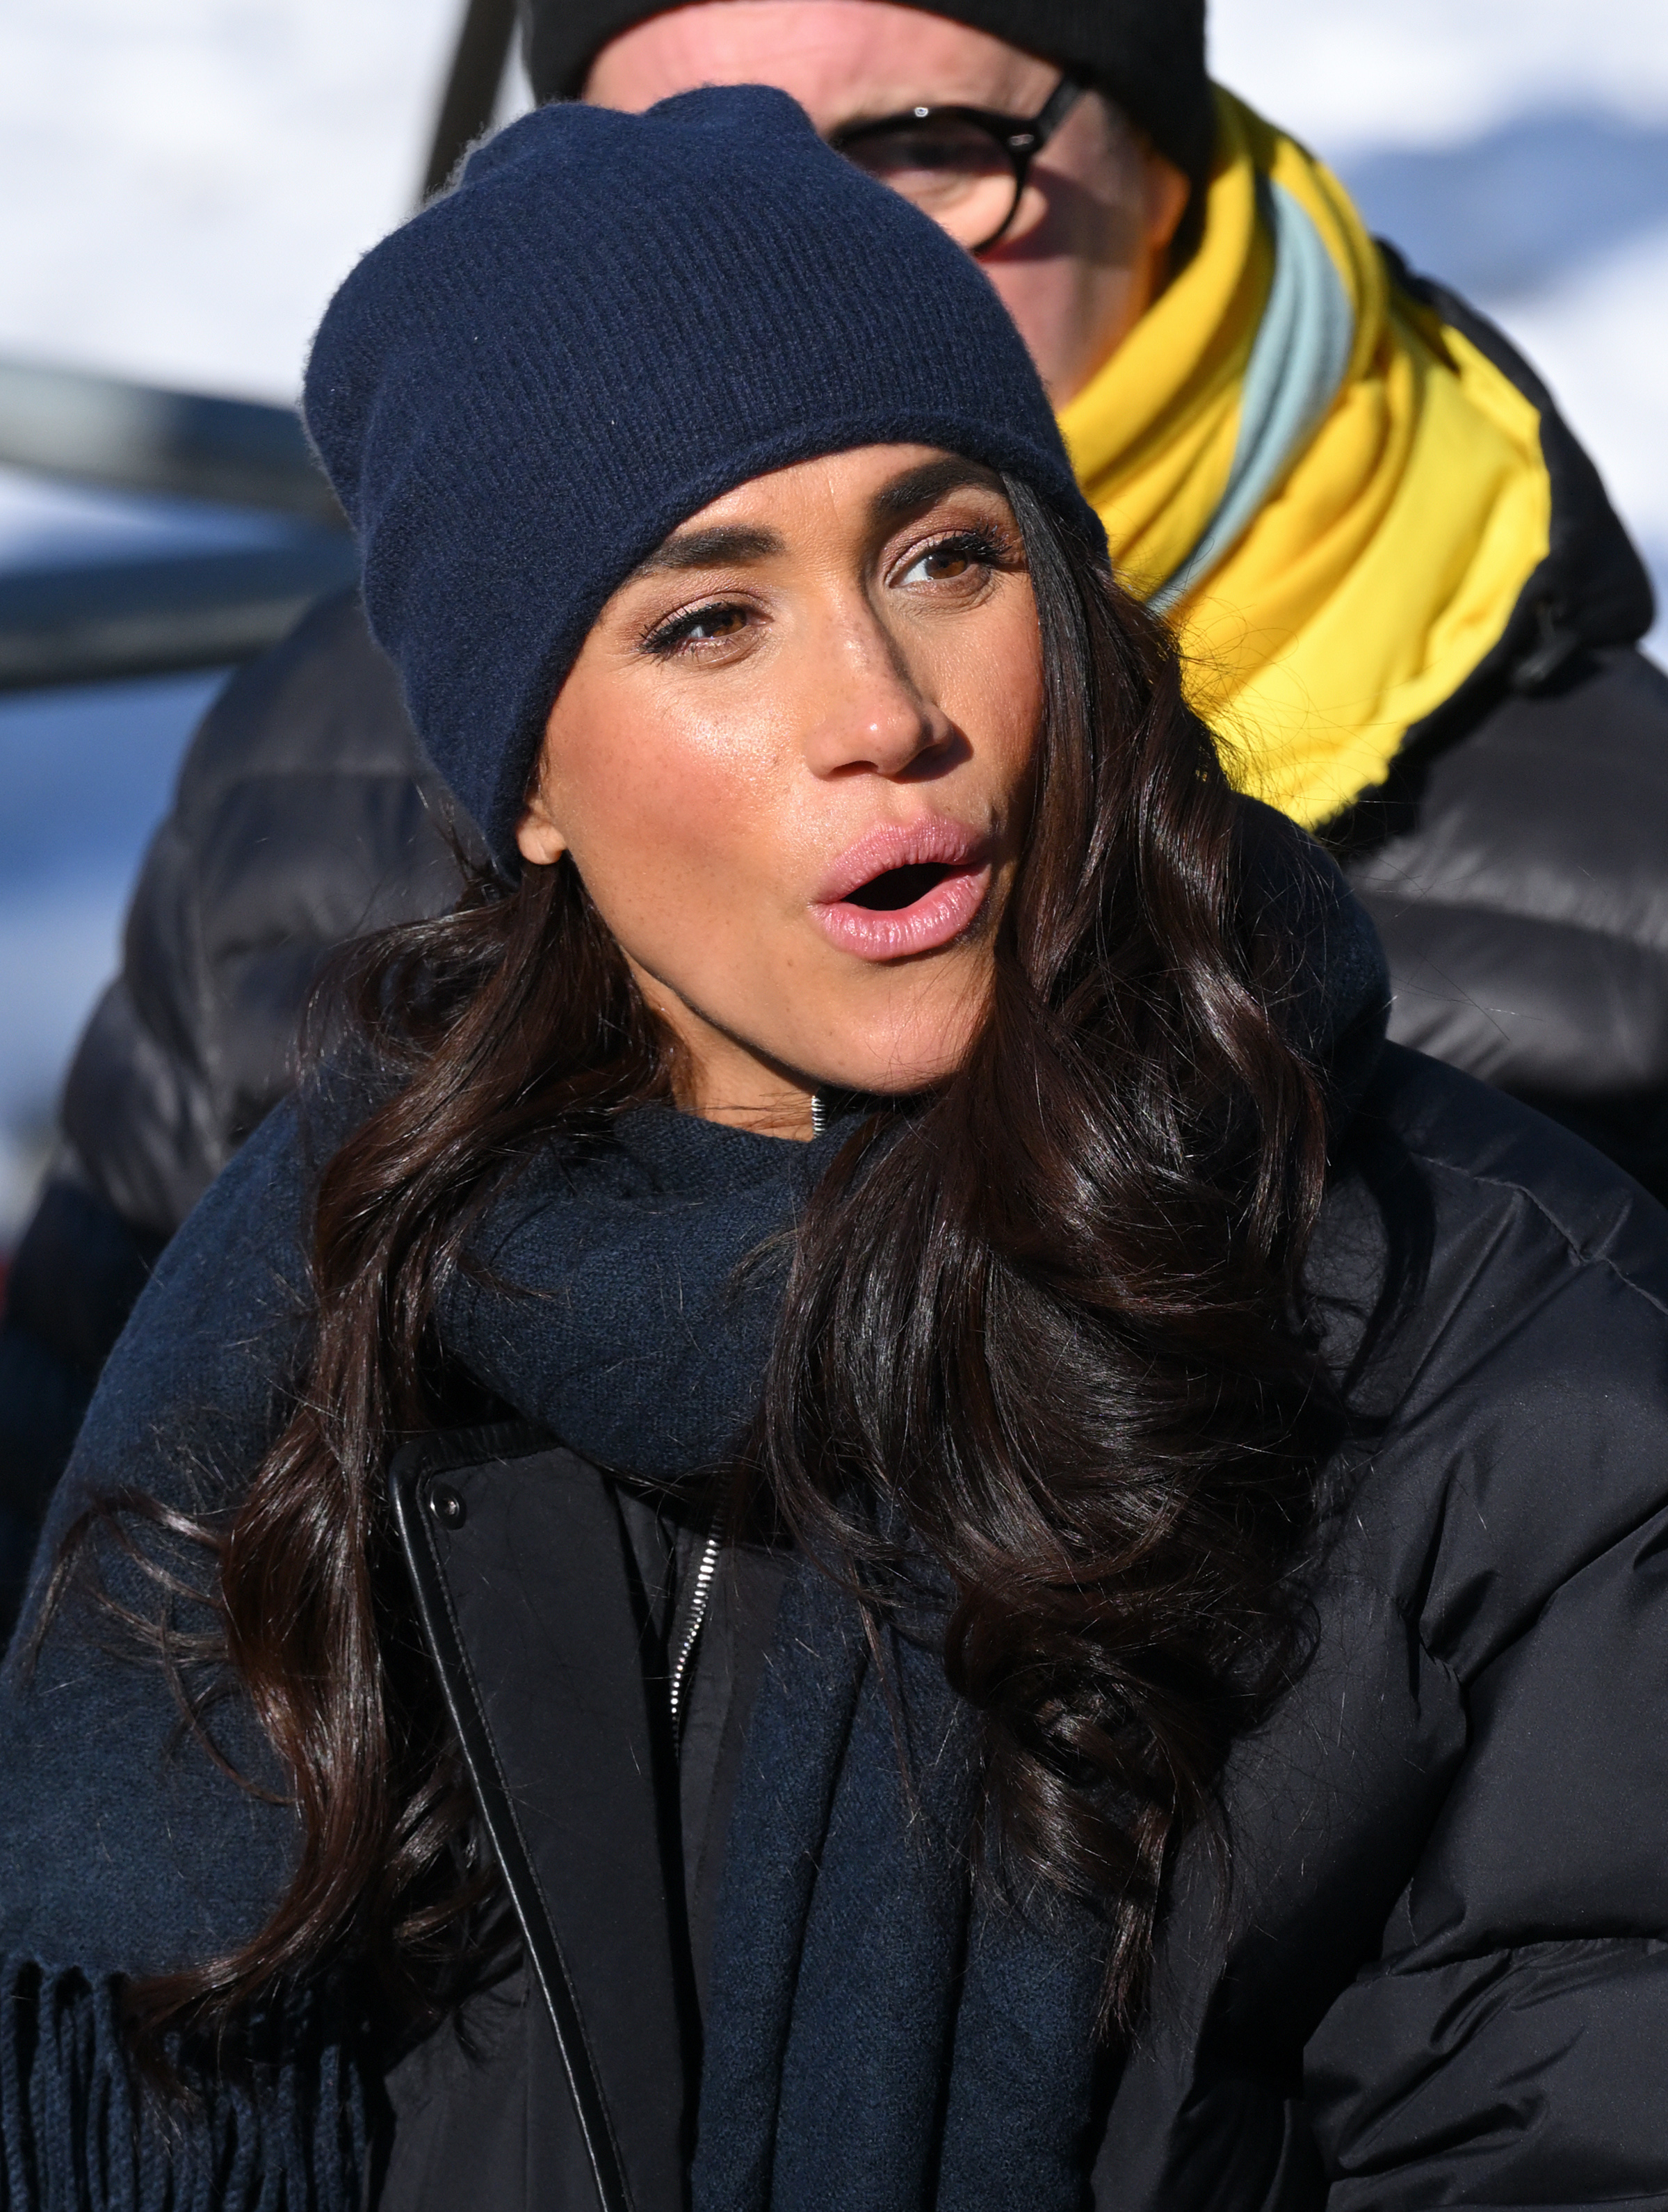 Meghan Markle at the Invictus Games One Year To Go Winter Training Camp | Source: Getty Images